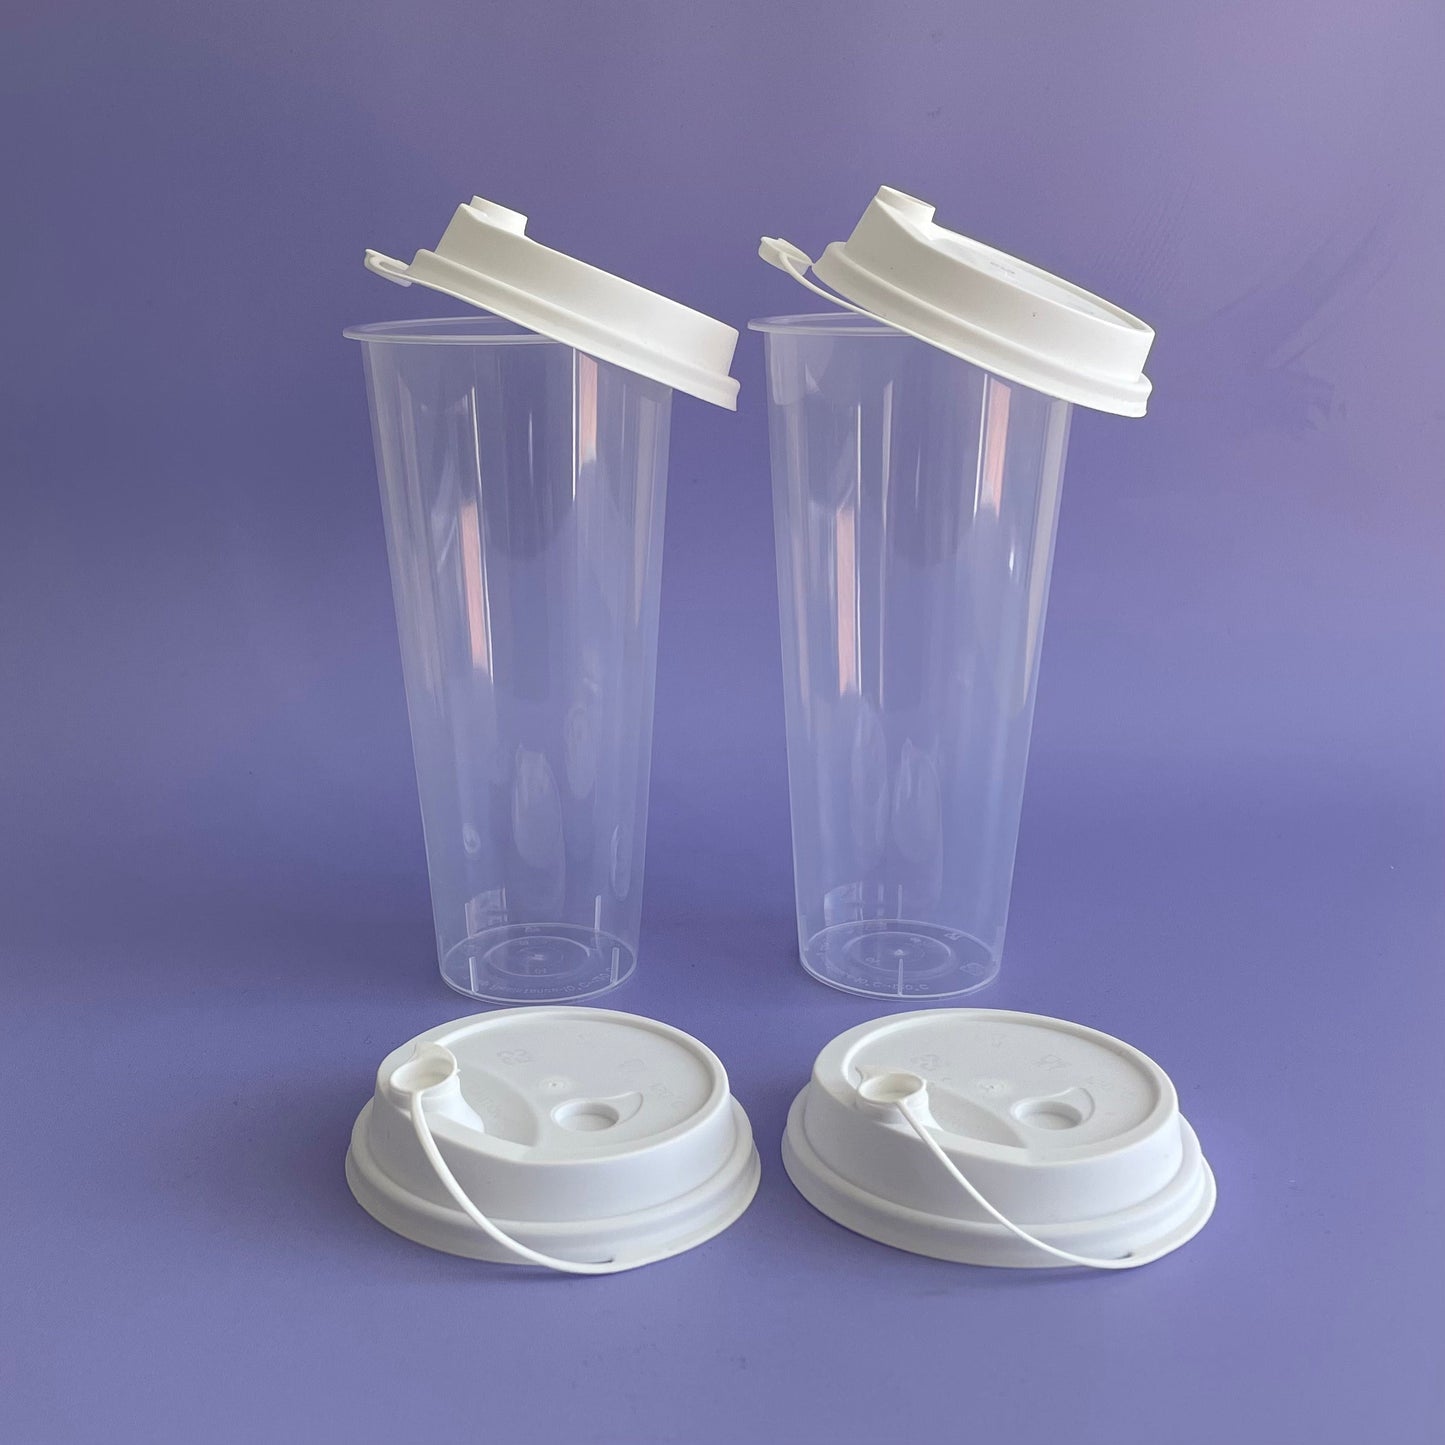 Plastic Cup & Lids with White Stopper